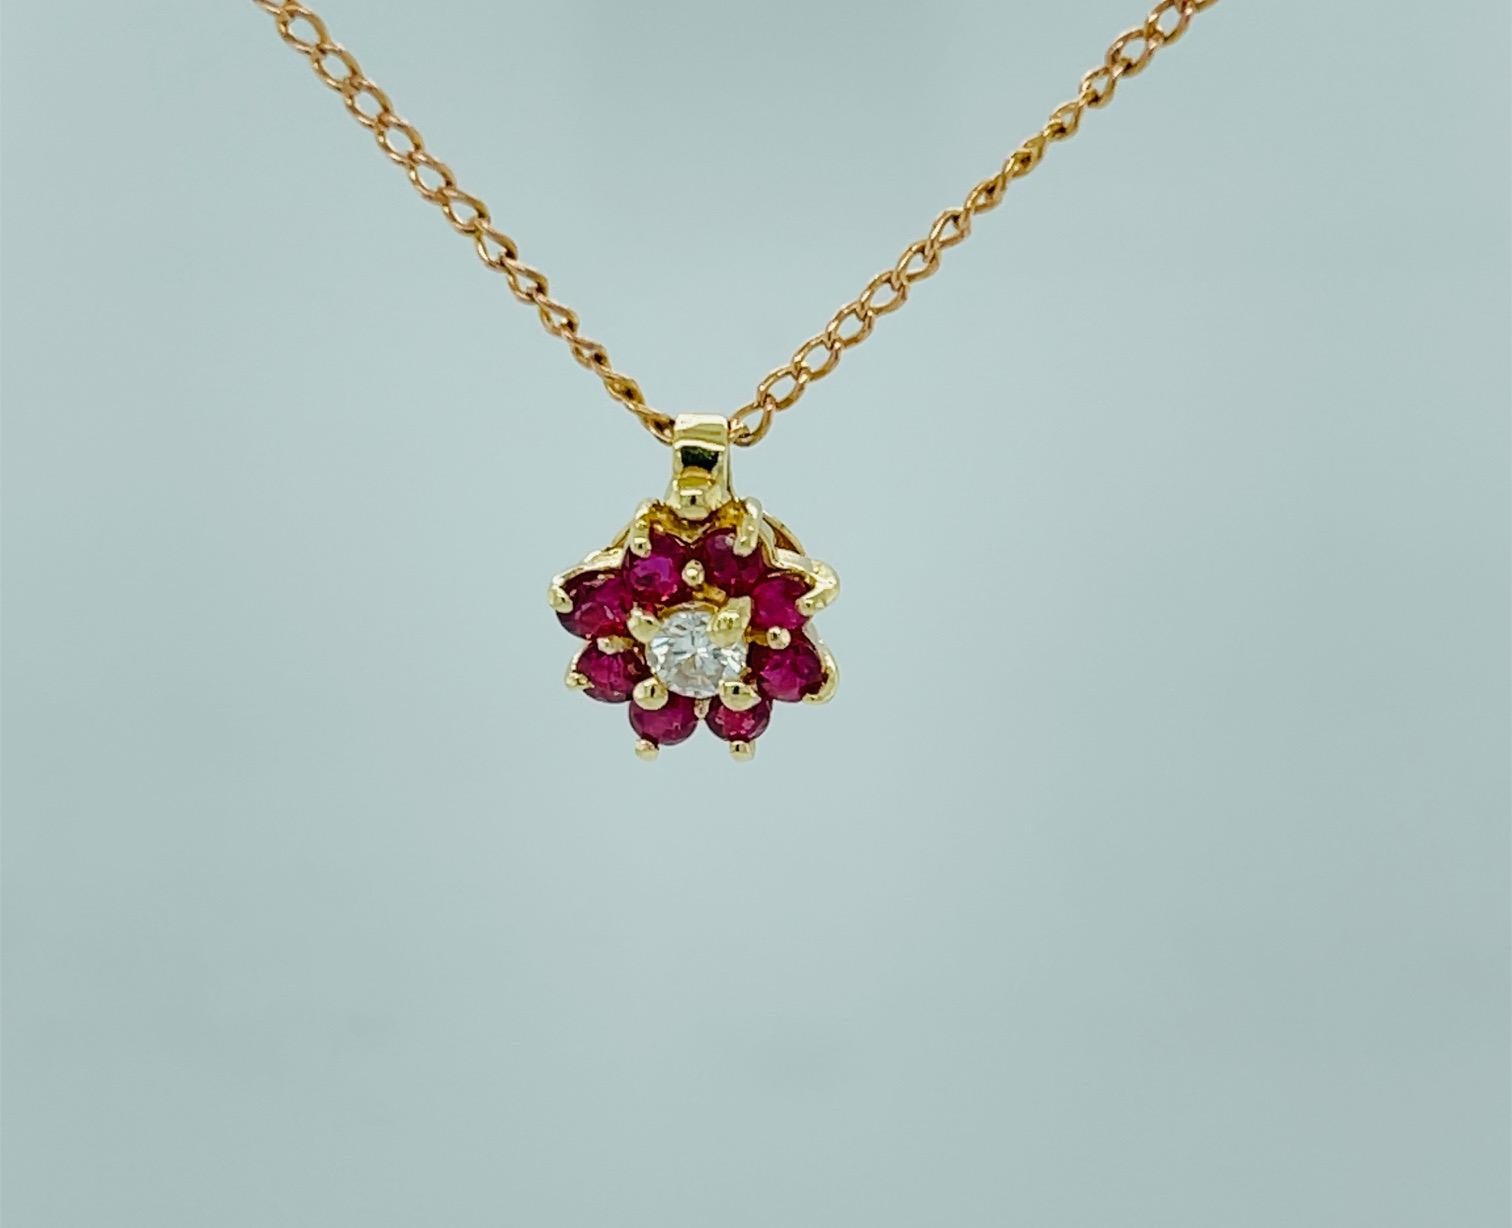 Diamond and Ruby Pendant 14K Yellow Gold

Round Diamond weighs 0.10 carat

F/G Color VS Clarity

Rubies Total carat weight 0.60 carat

With 16.0 